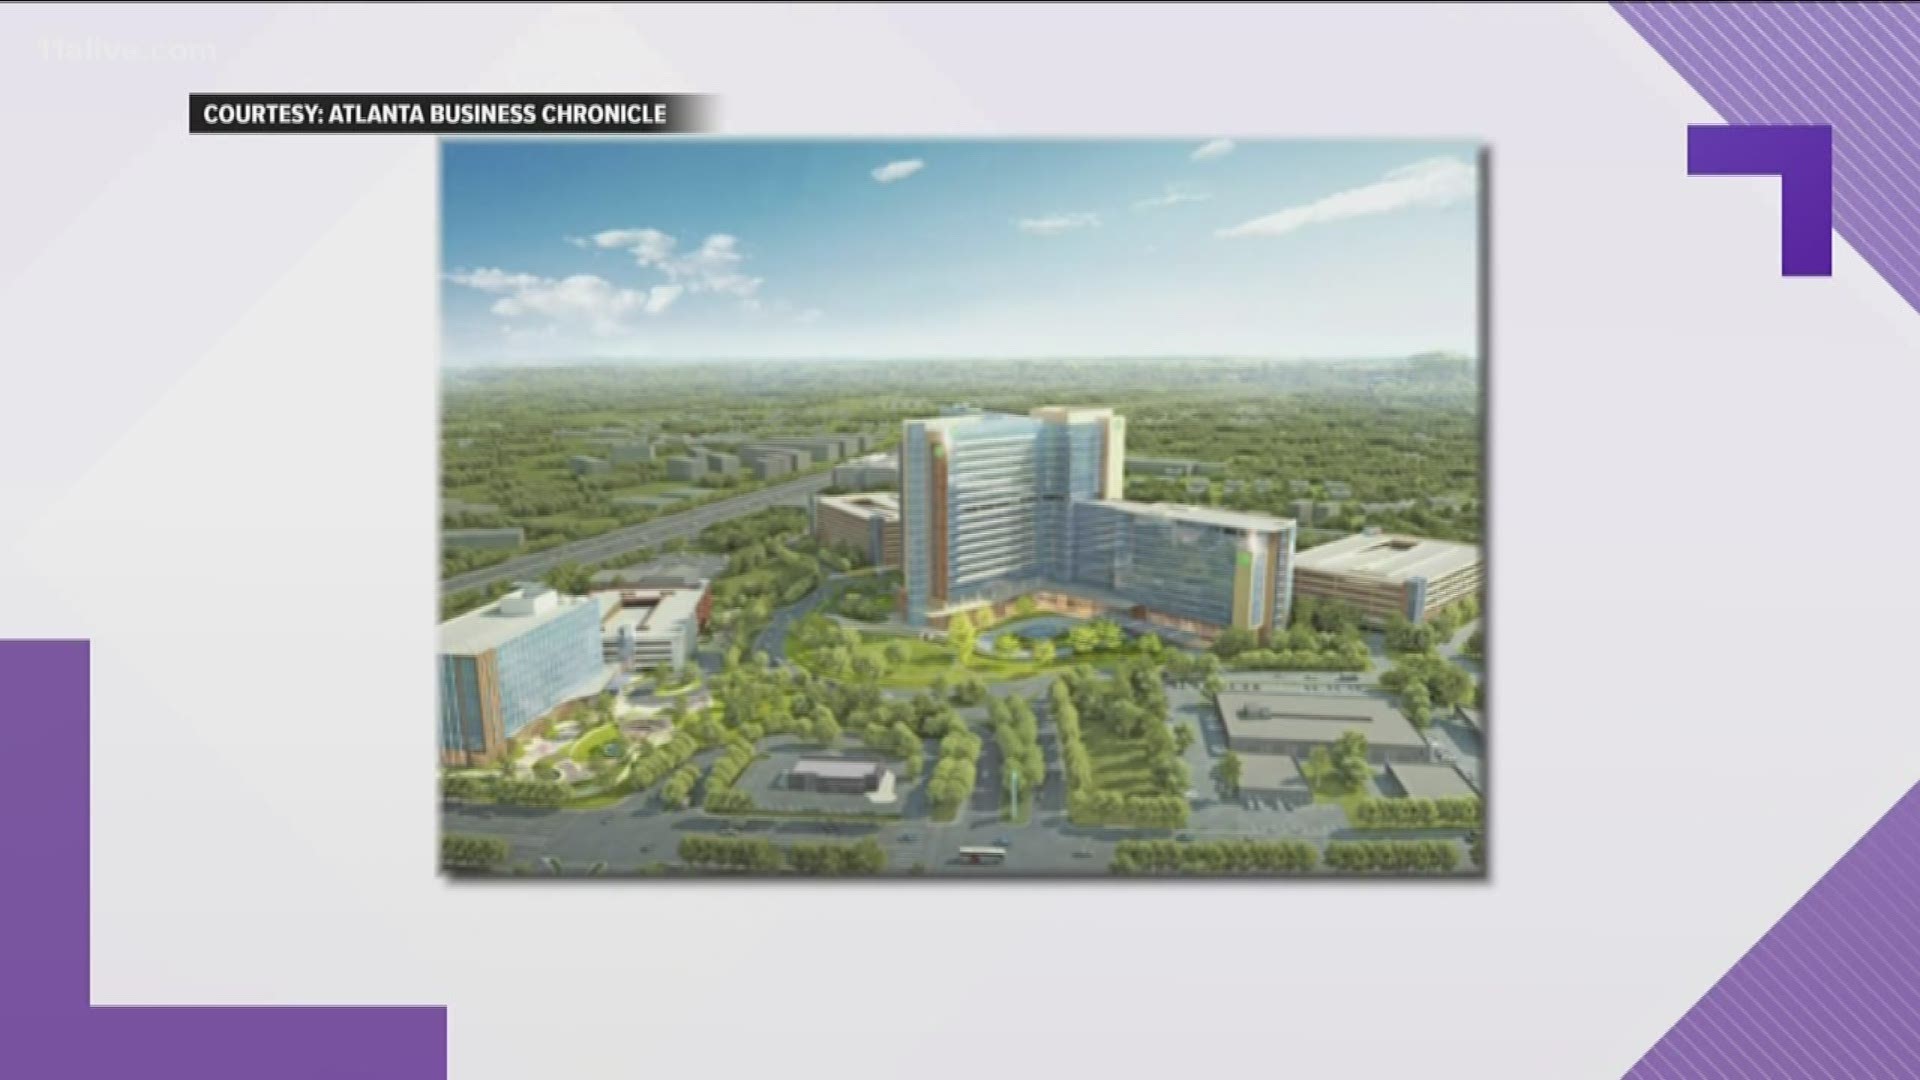 The 446-bed hospital may be as tall as 19 stories and is scheduled to open in 2025.